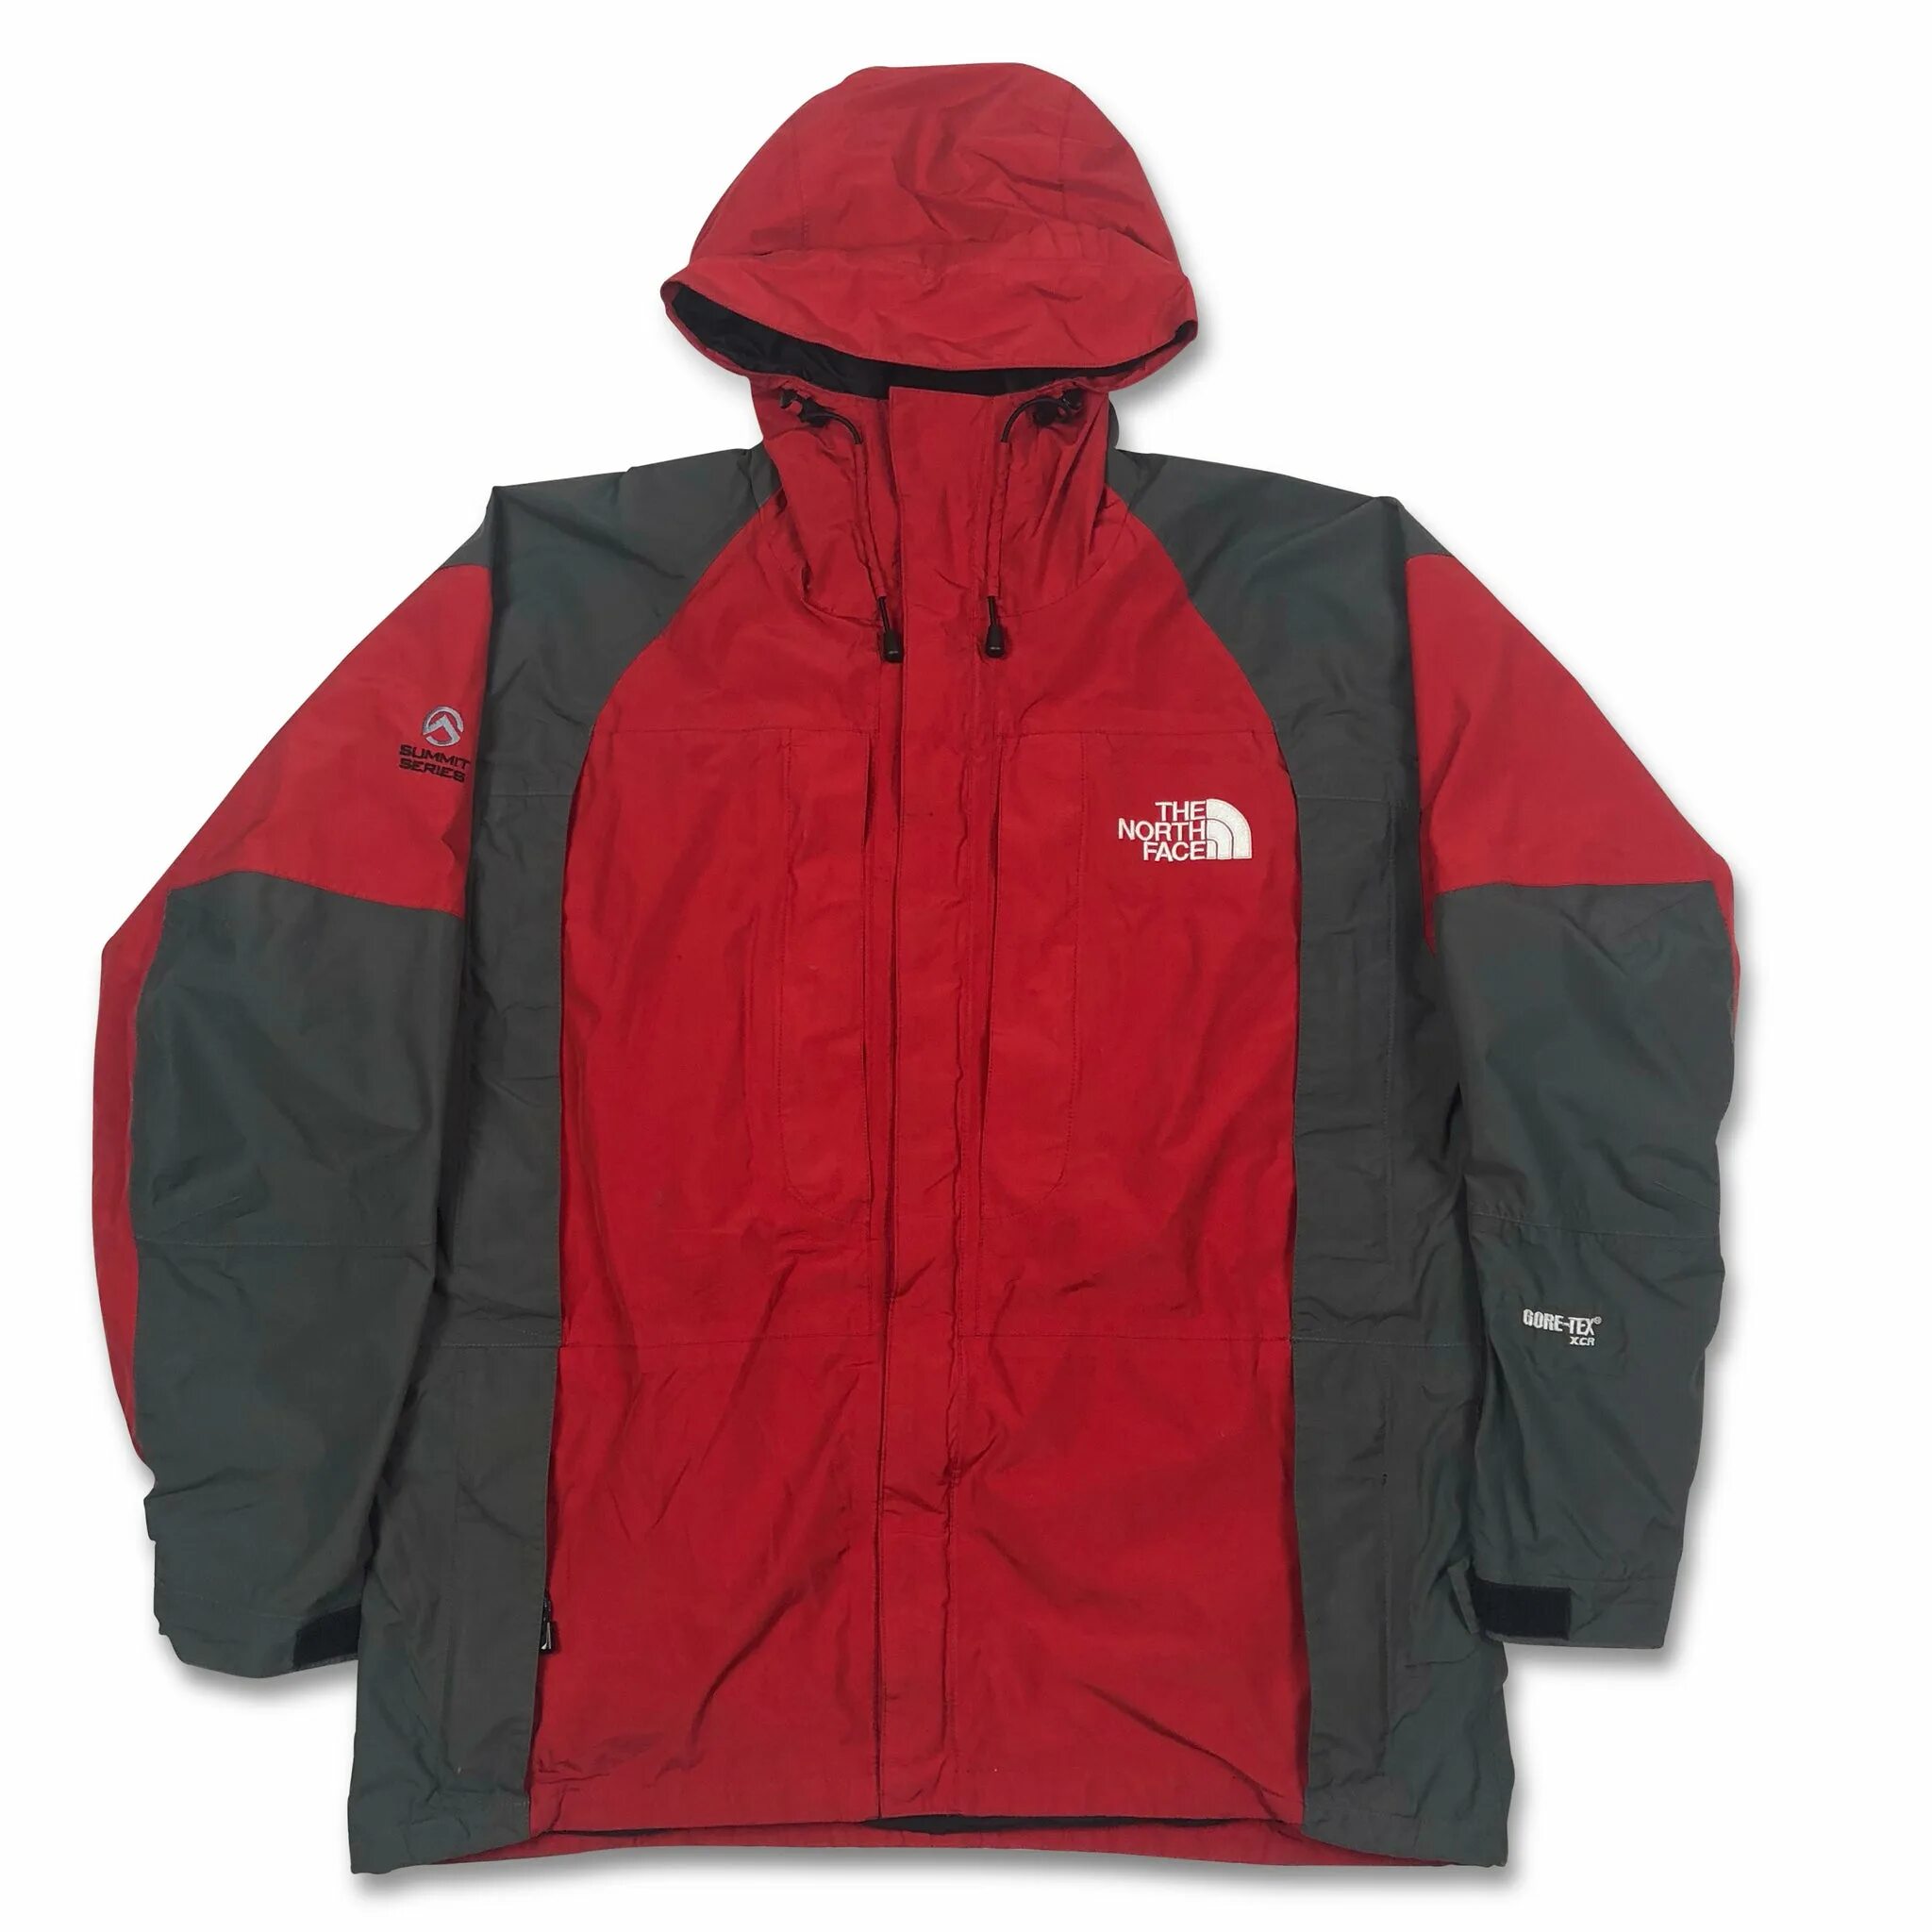 The north face summit series. The North face Summit Series Gore-Tex. The North face Gore-Tex куртка. The North face Summit Series Gore-Tex XCR. TNF Summit Series куртки.